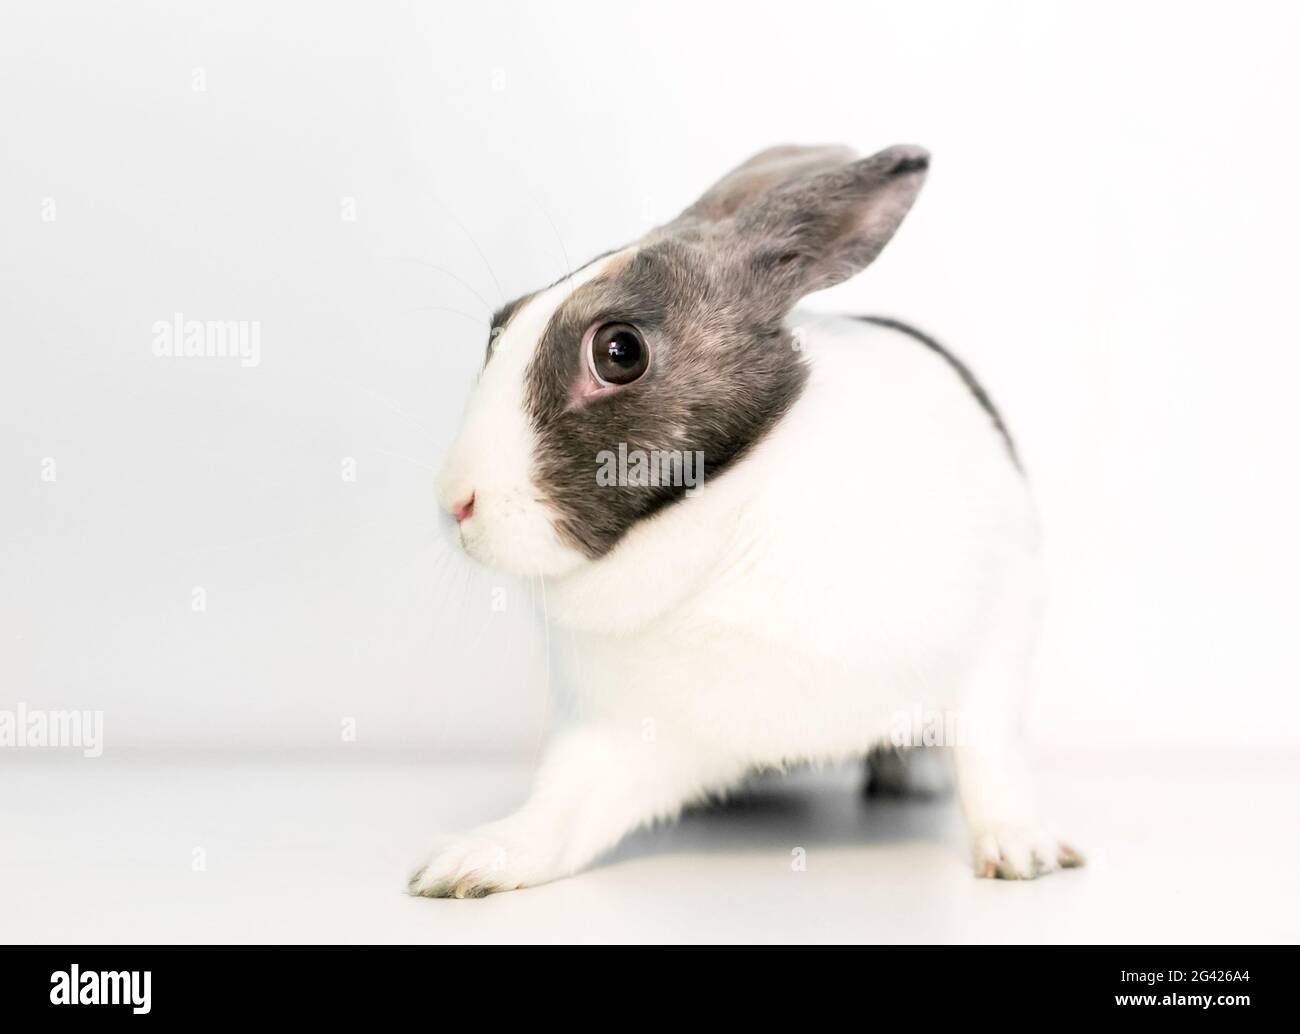 A domestic pet rabbit standing in a tense position with a nervous expression Stock Photo